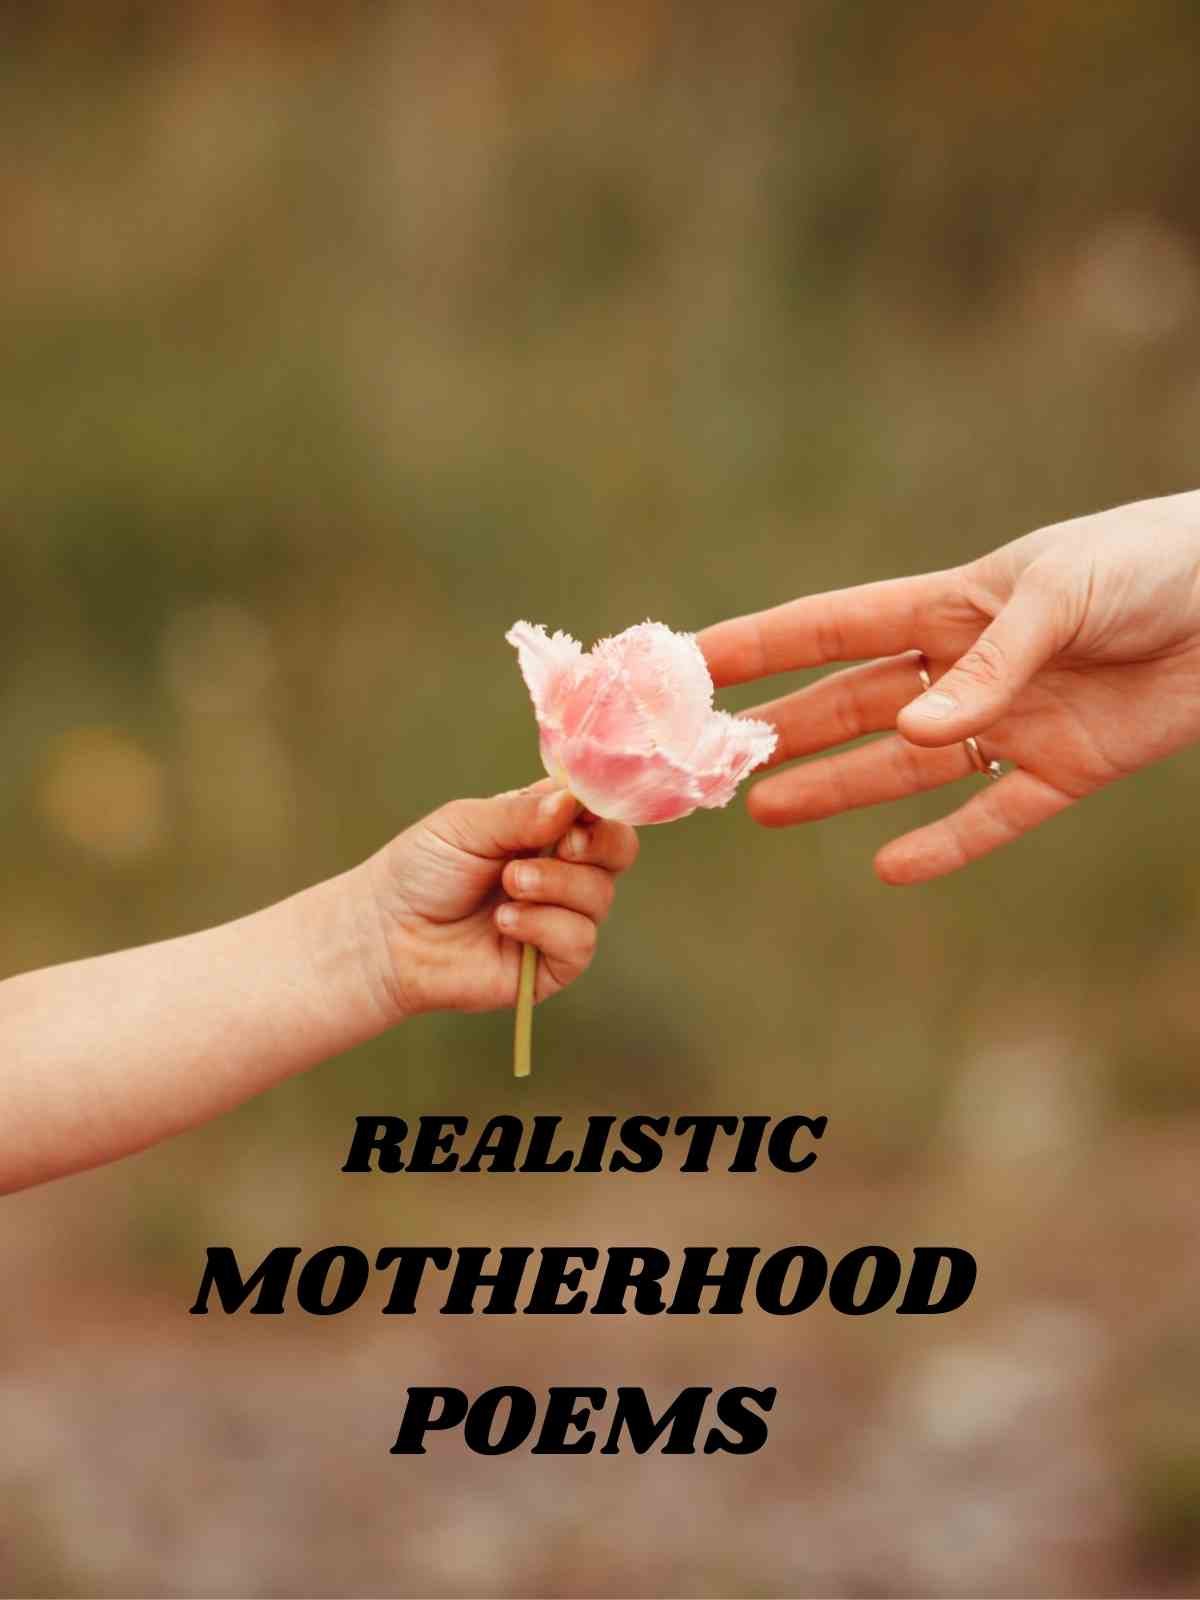 Realistic Poems About Motherhood